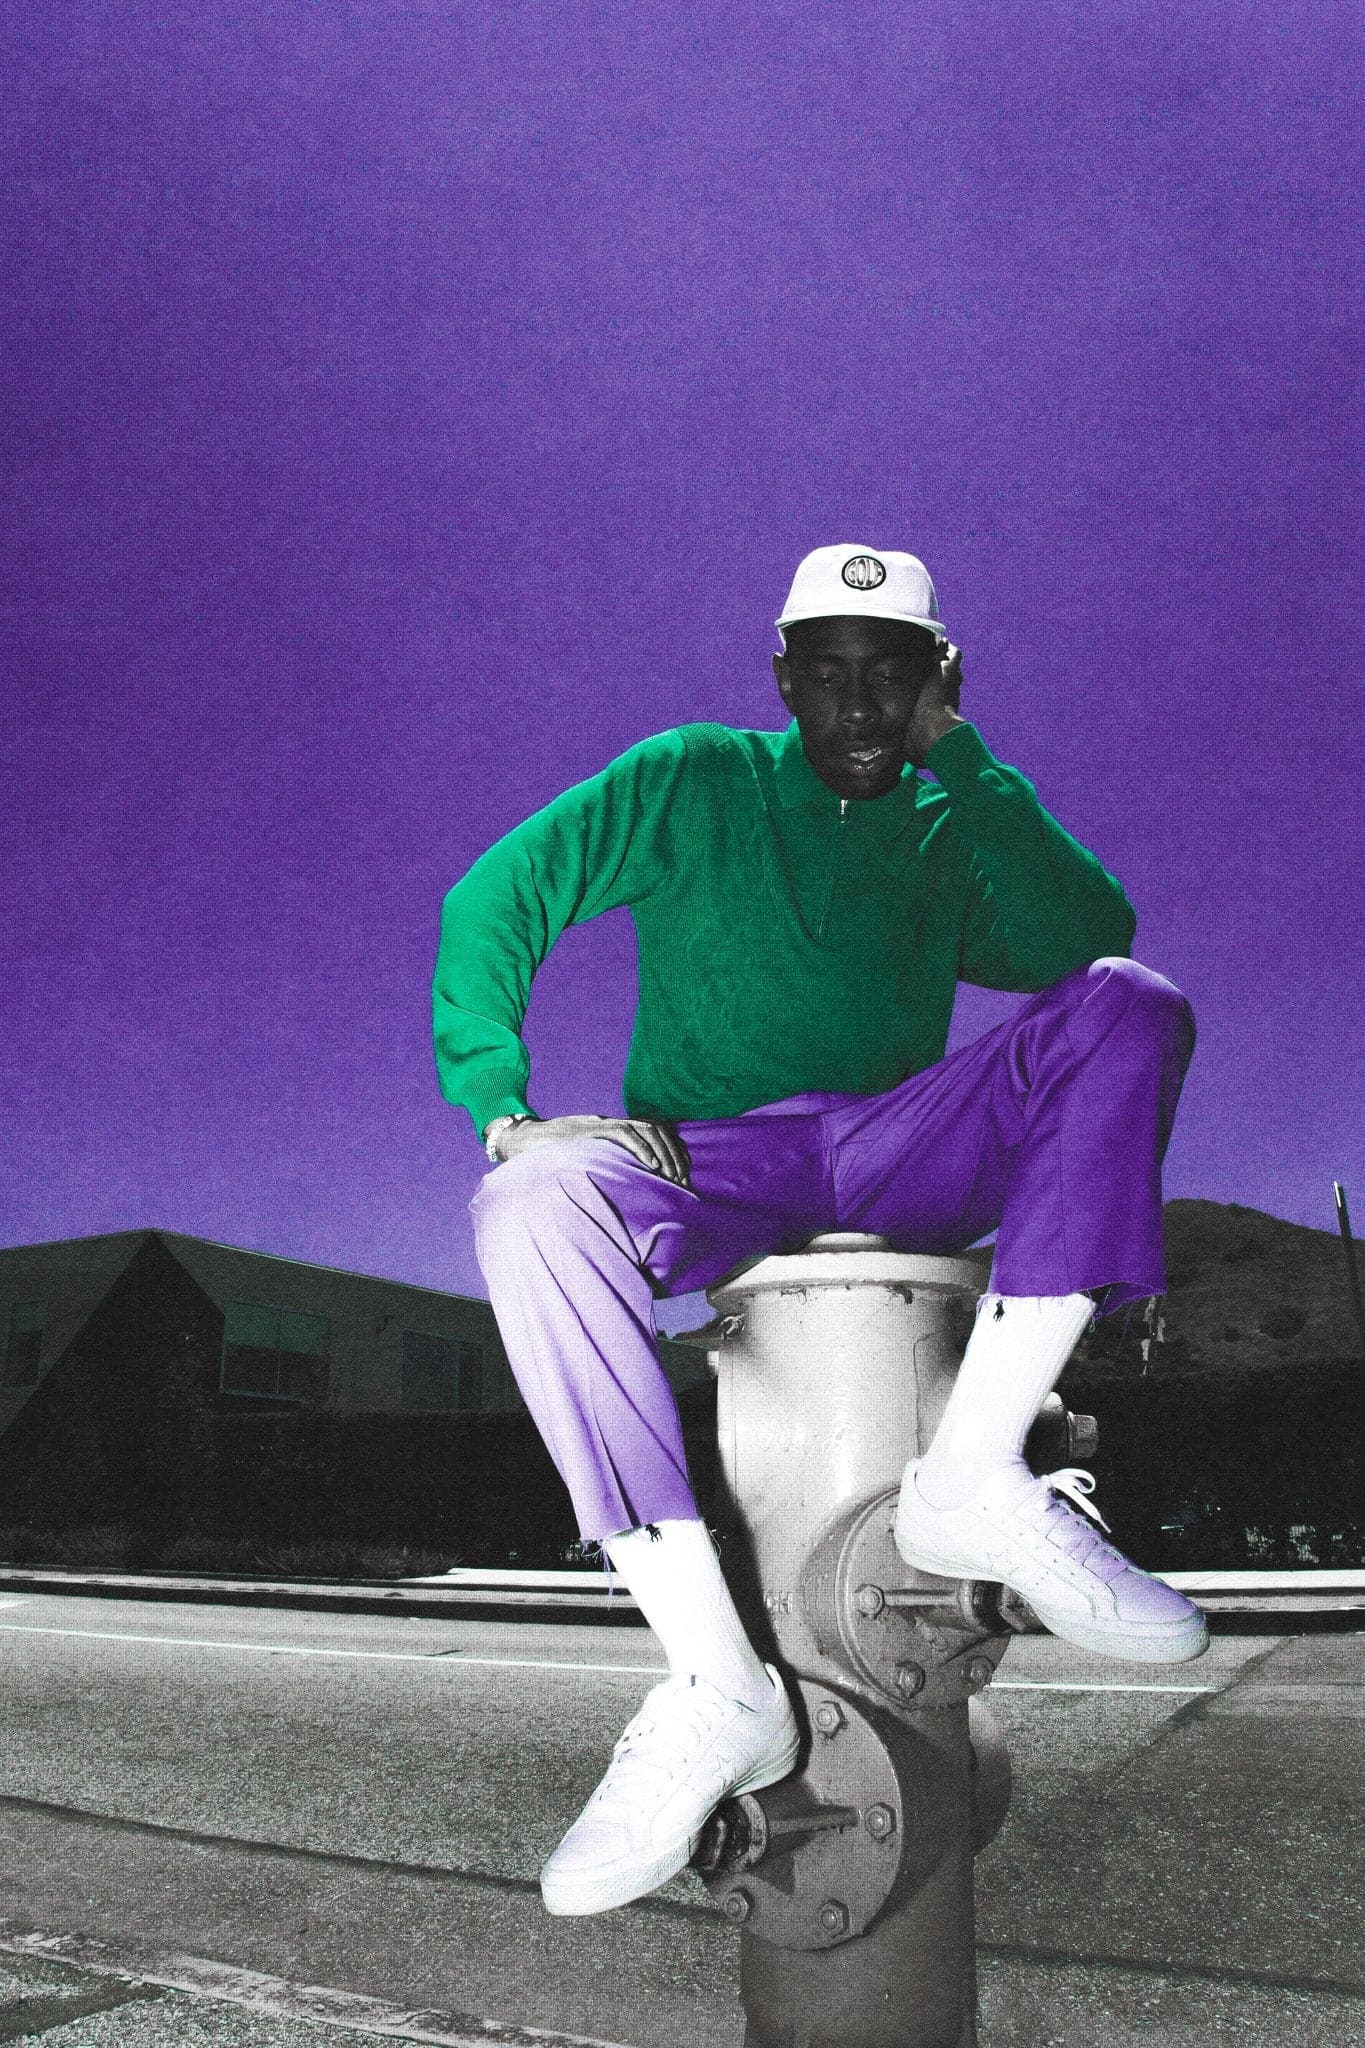 Tyler, the Creator 'IGOR' Poster – The Indie Planet